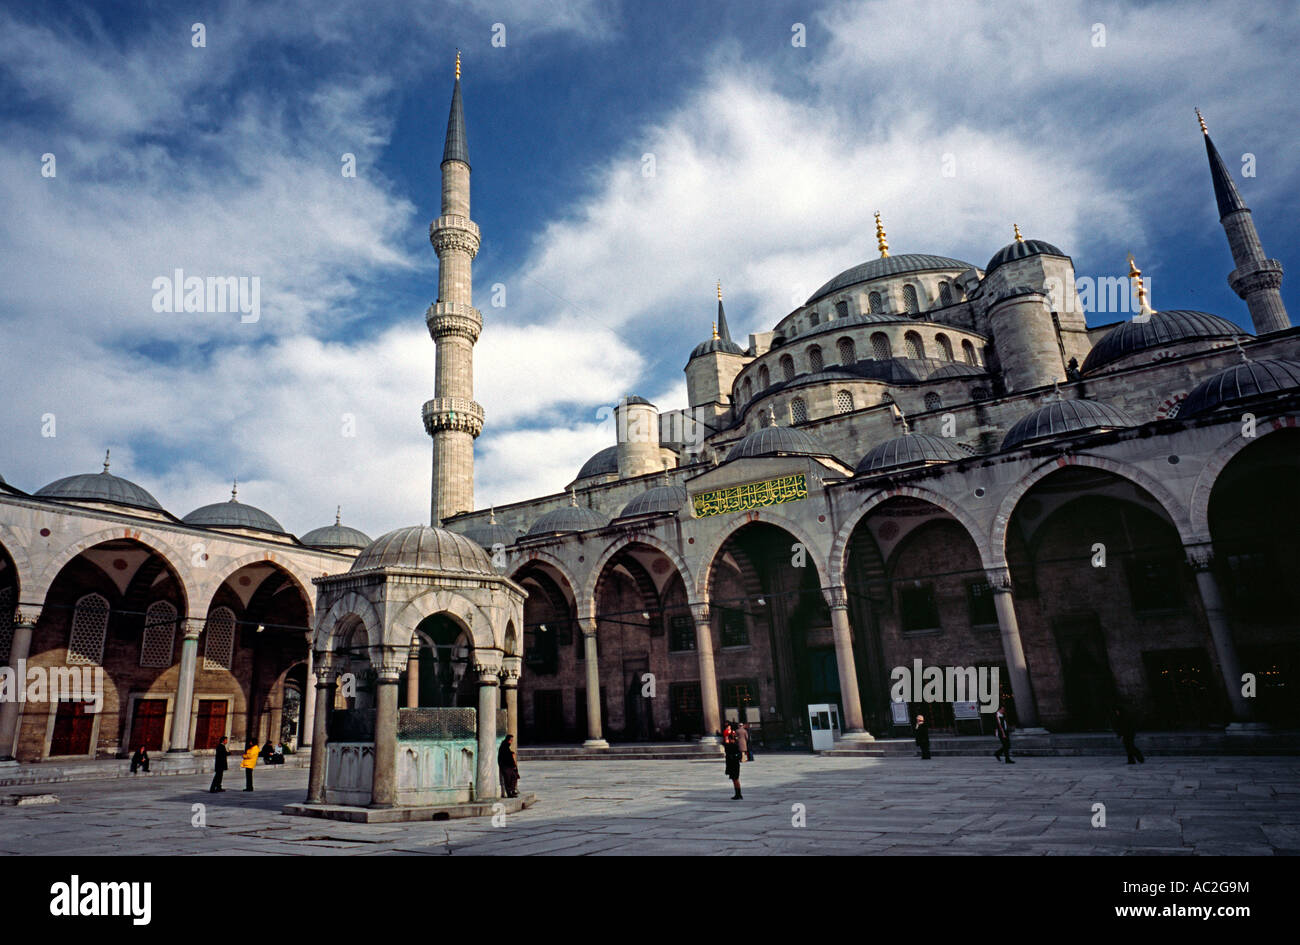 Sultan Ahmed Mosque (Sultanahmet Camii) or Blue Mosque in Istanbul. Stock Photo